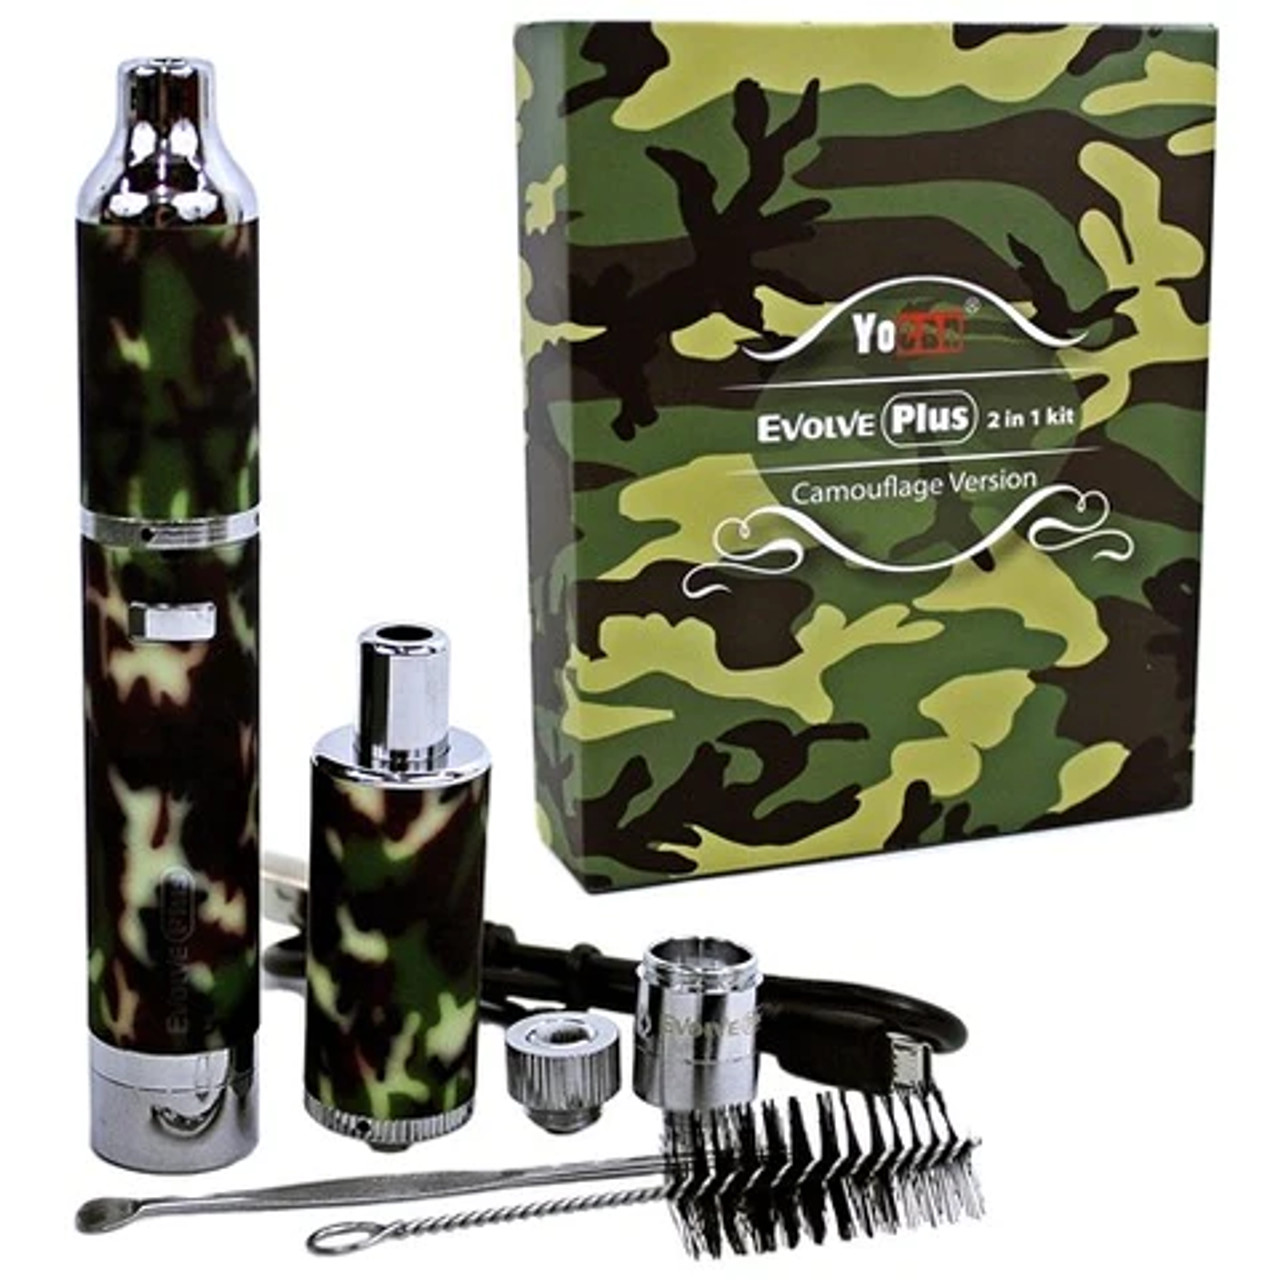 Buy Yocan - Evolve Plus 2 in 1 Wax Kit (Camouflage Edition) in Inline Vape  now